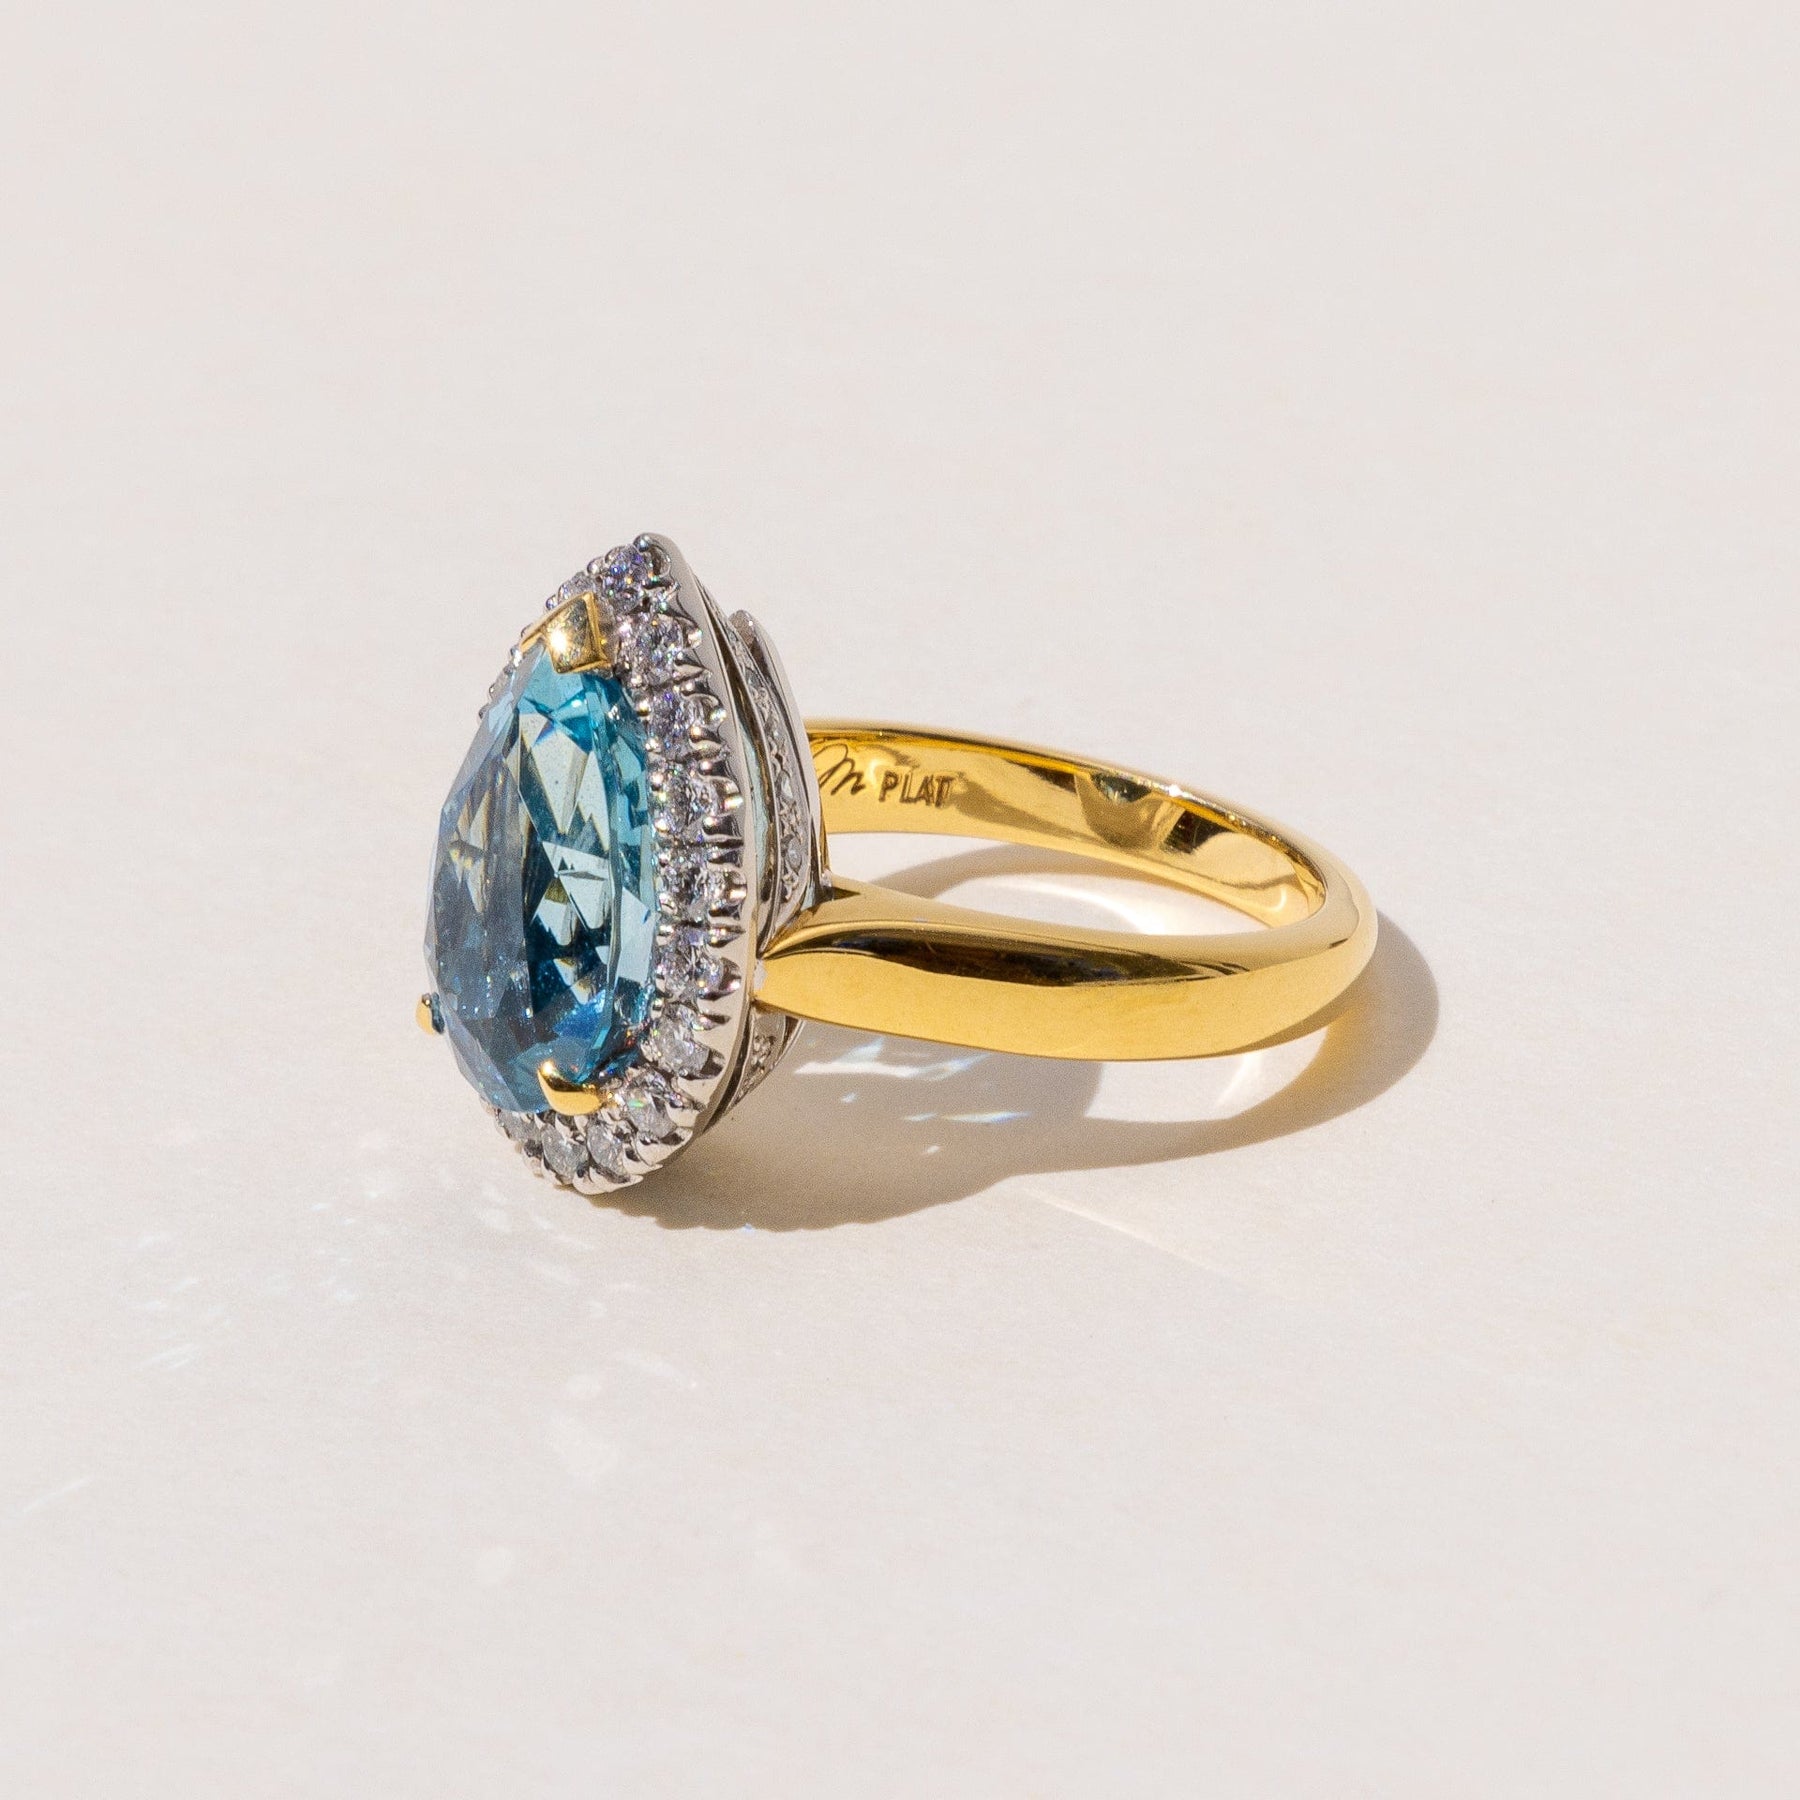  Large Aquamarine Cocktail Ring in 18ct Yellow Gold by our Master Jeweller in Auckland NZ